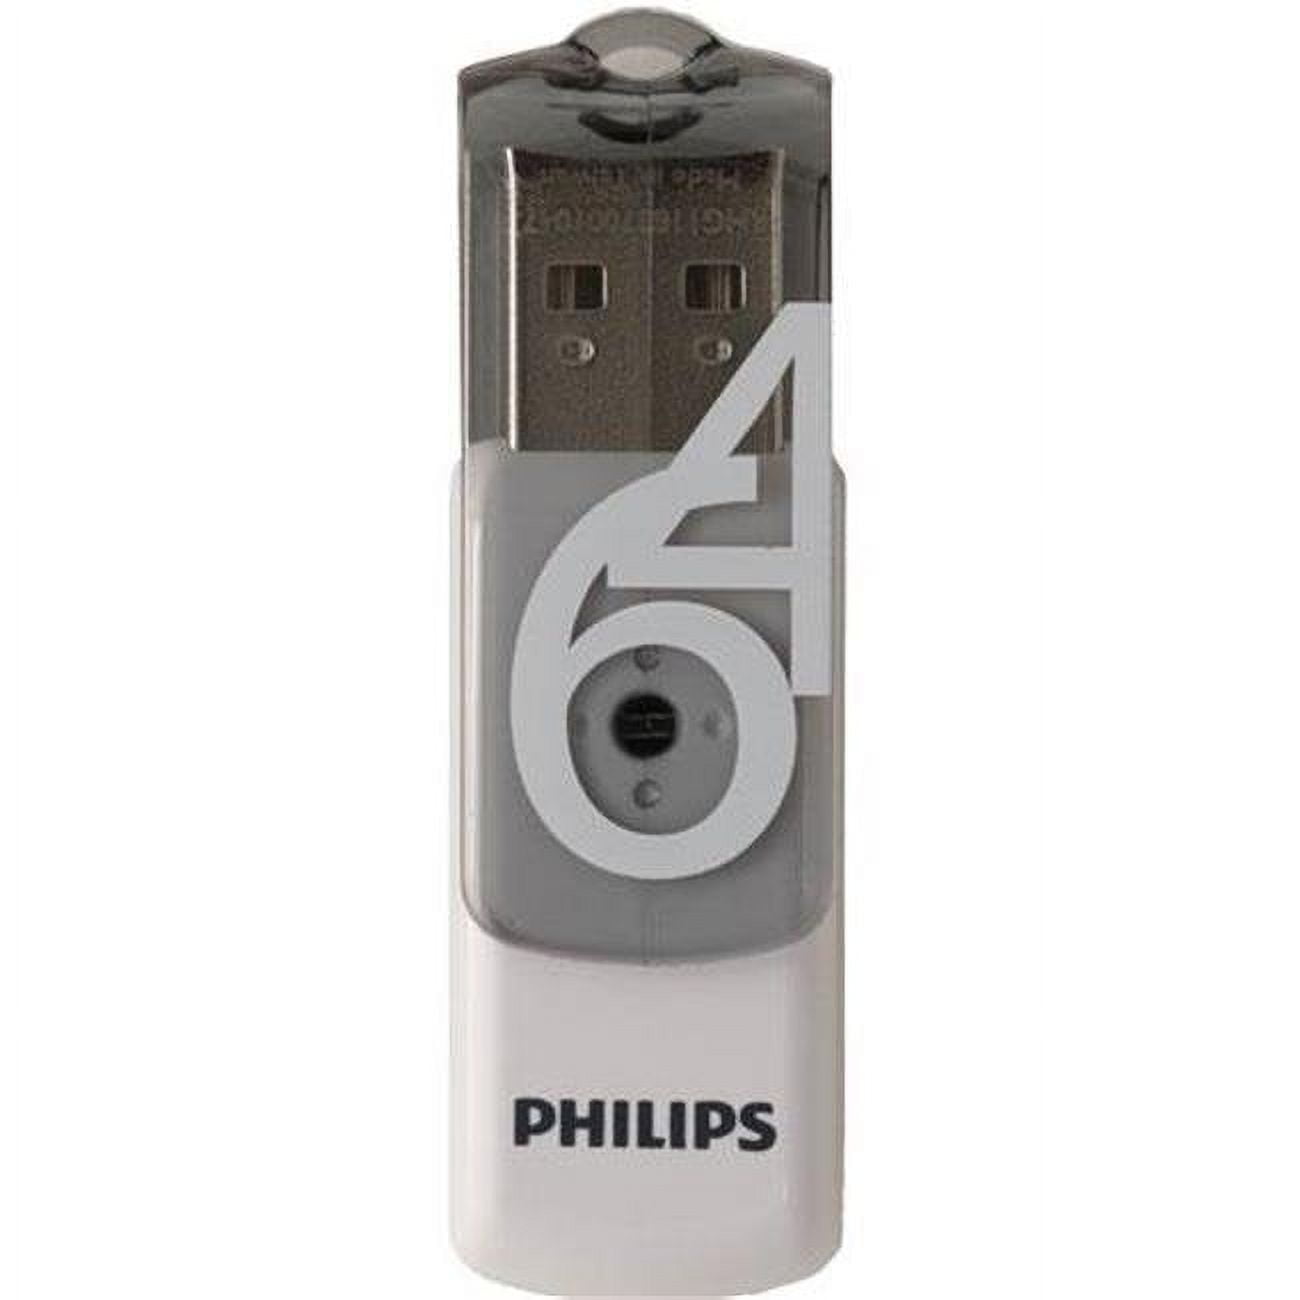 Picture of Philips PHMMD64GBVIVIDG 64GB USB 2.0 Vivid Edition Flash Drive - Grey